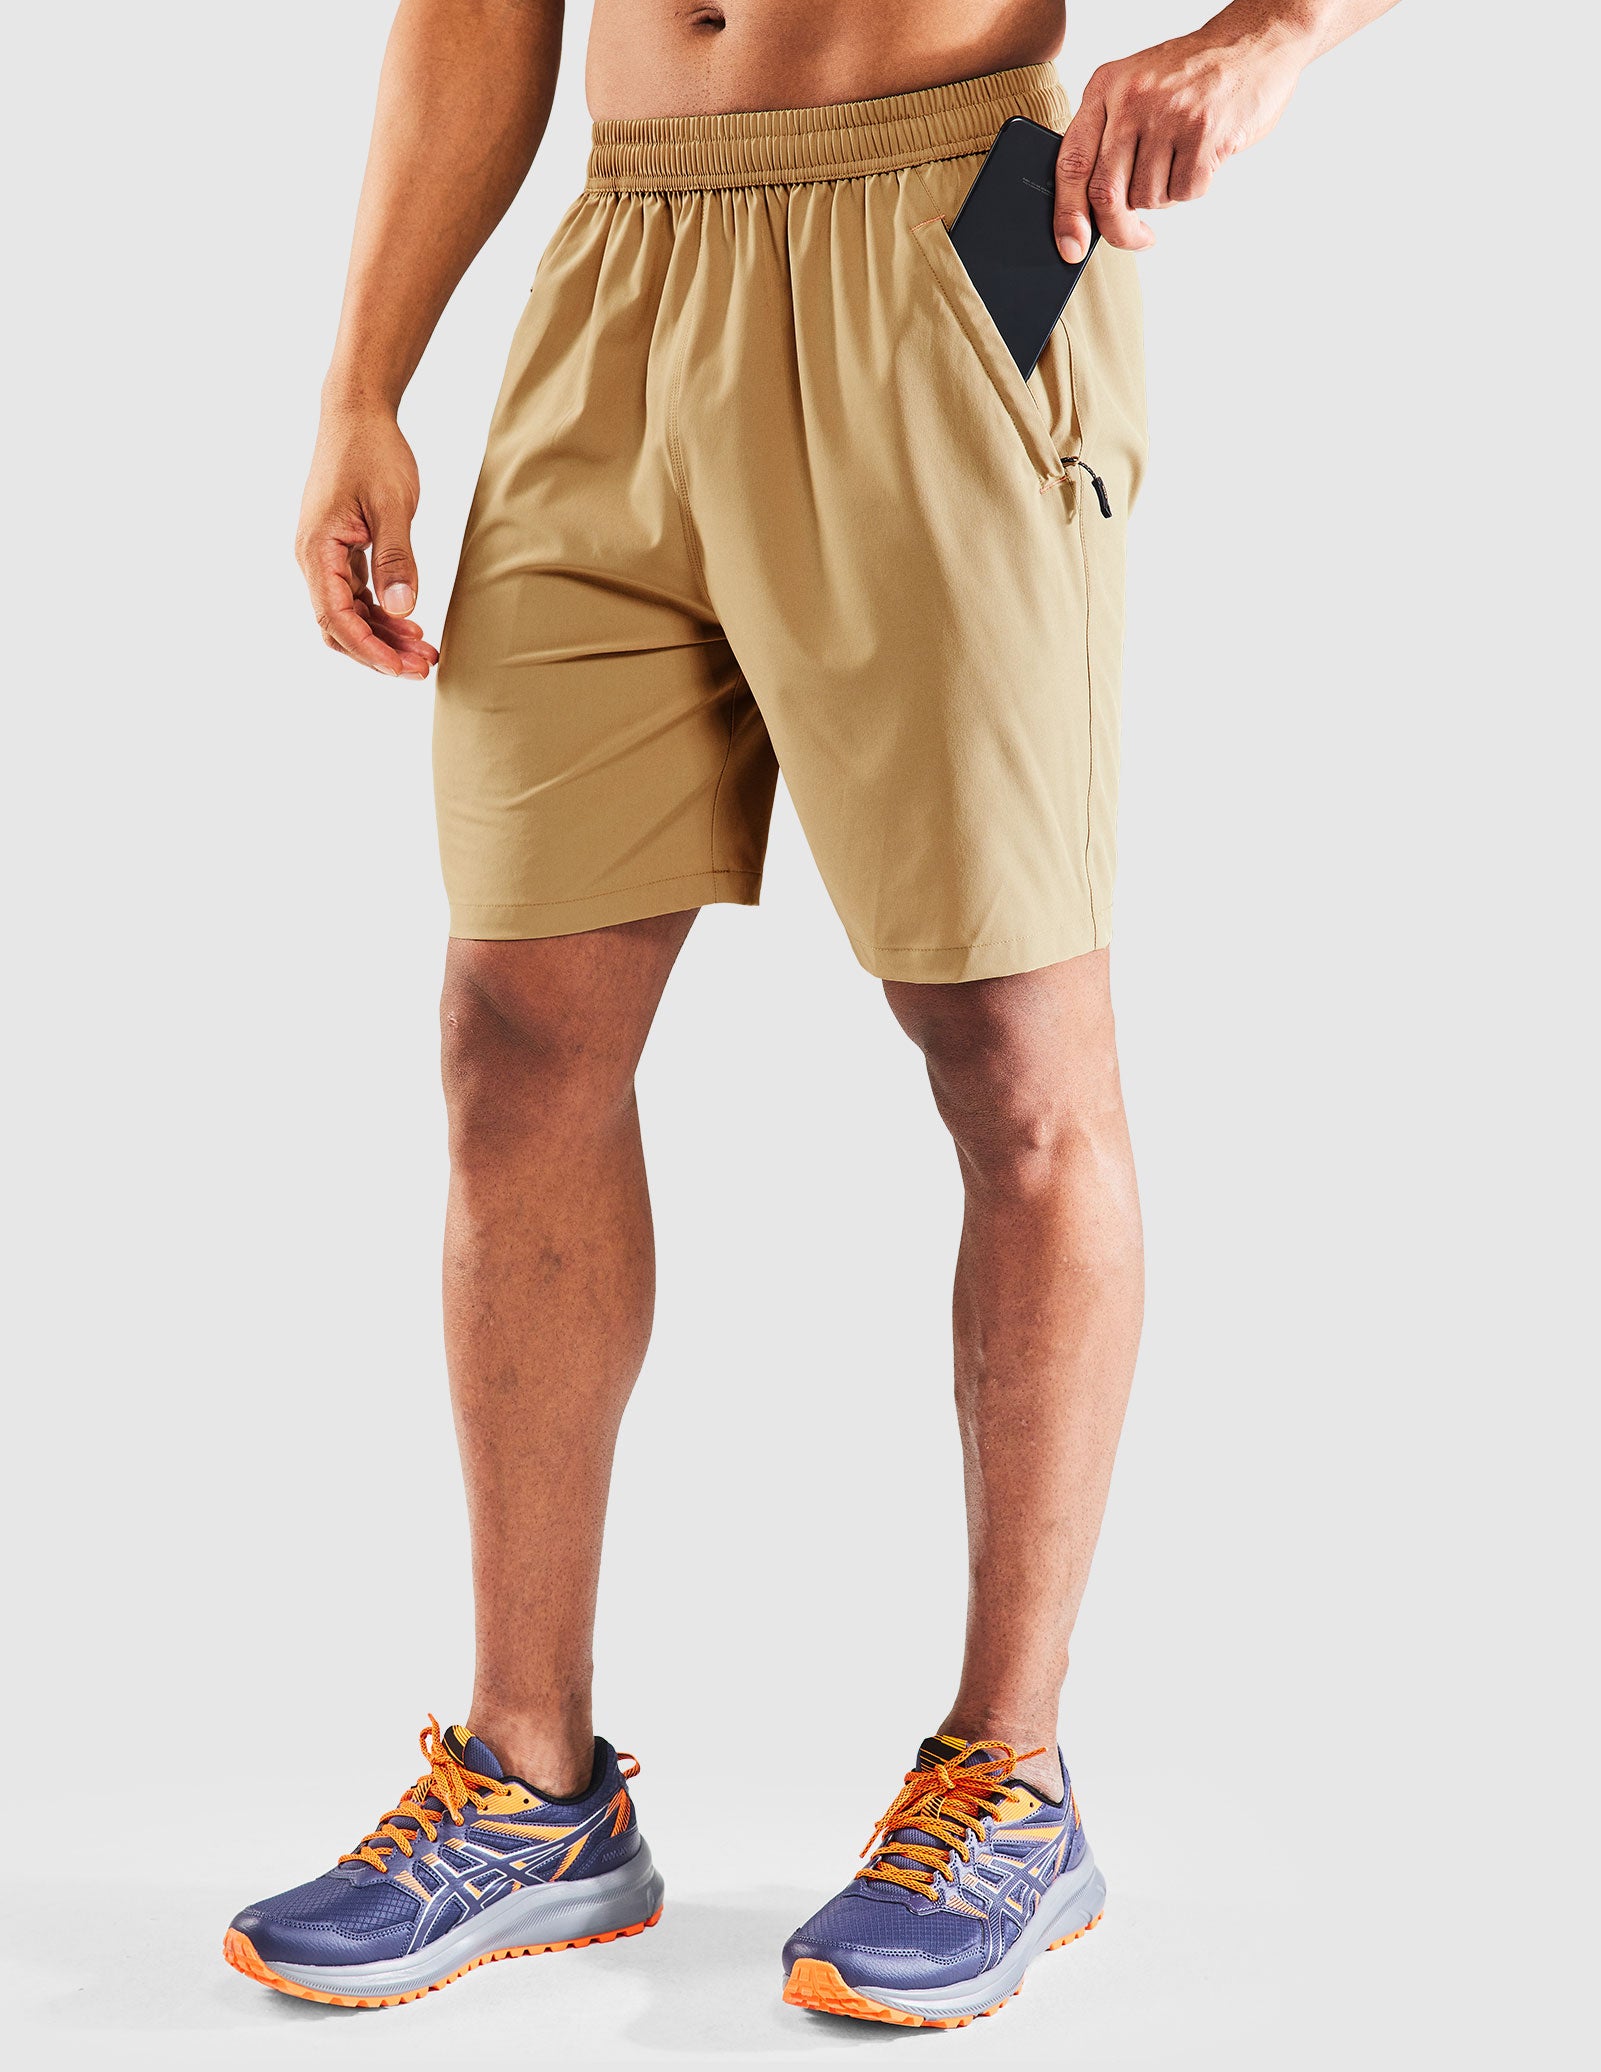 Men's Quick Dry Running Shorts with Zipper Pocket 7 Inch